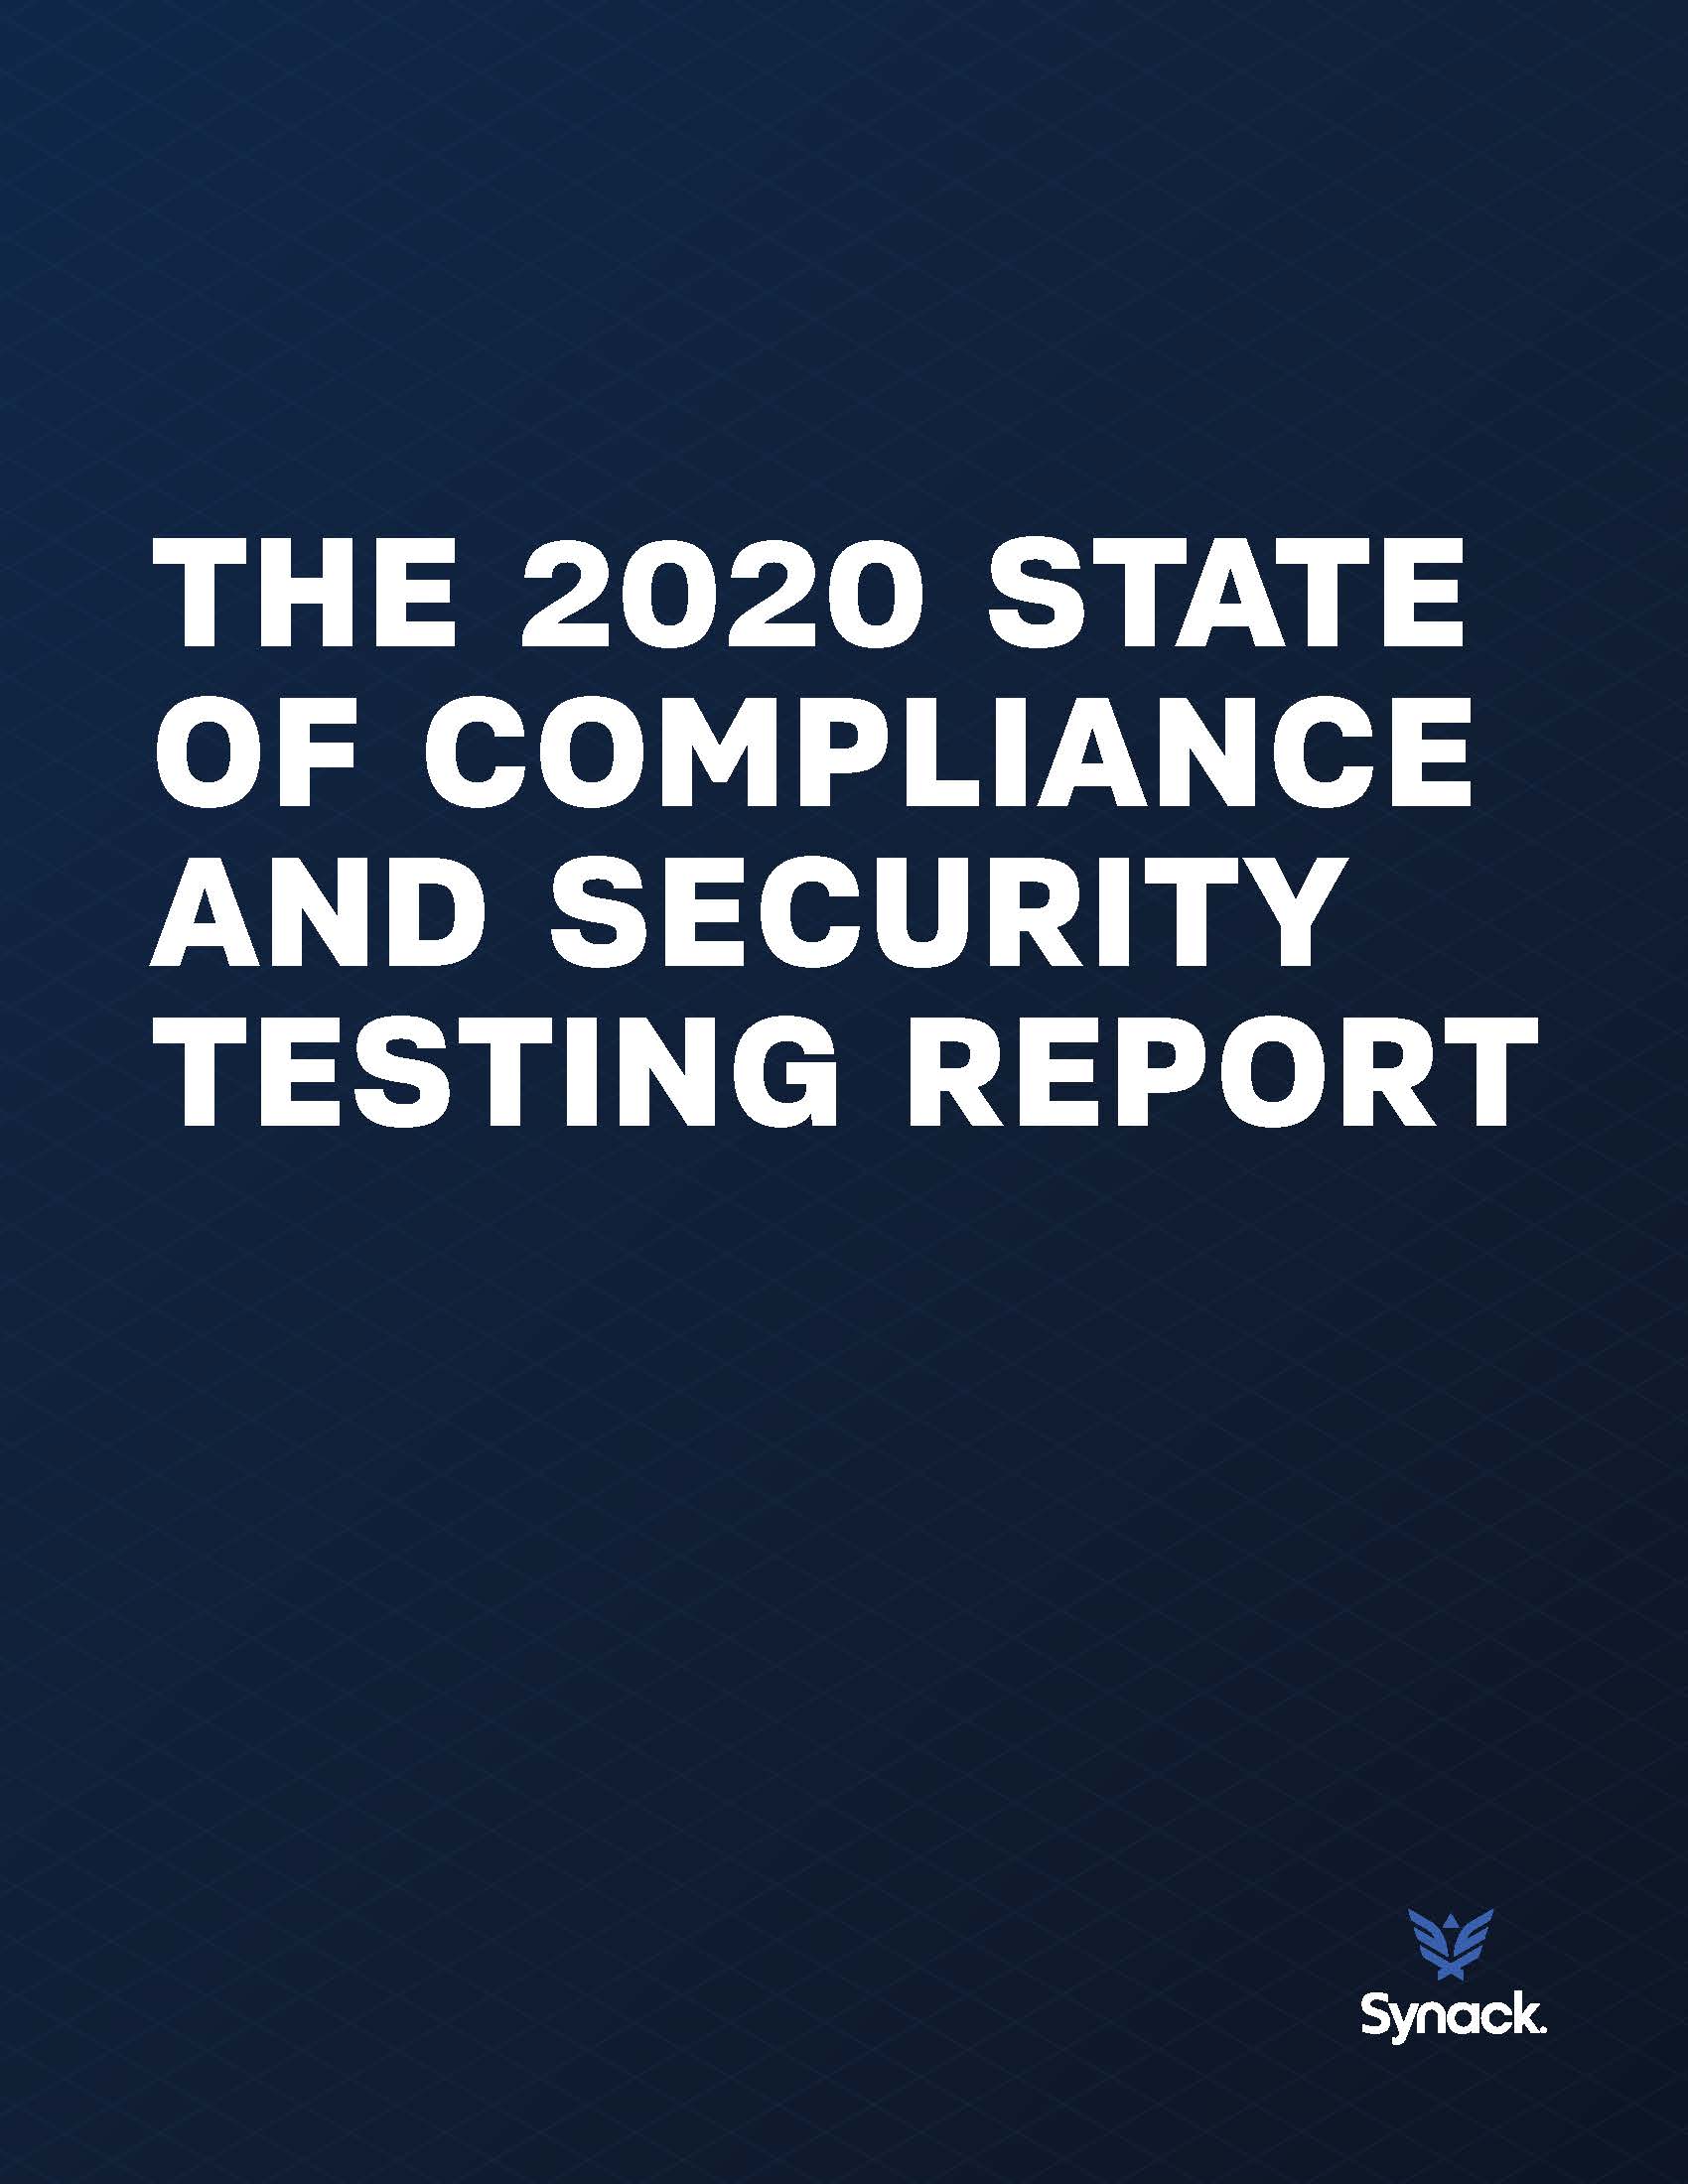 SYNACK - 2020_state_compliance_security_report_Page_01